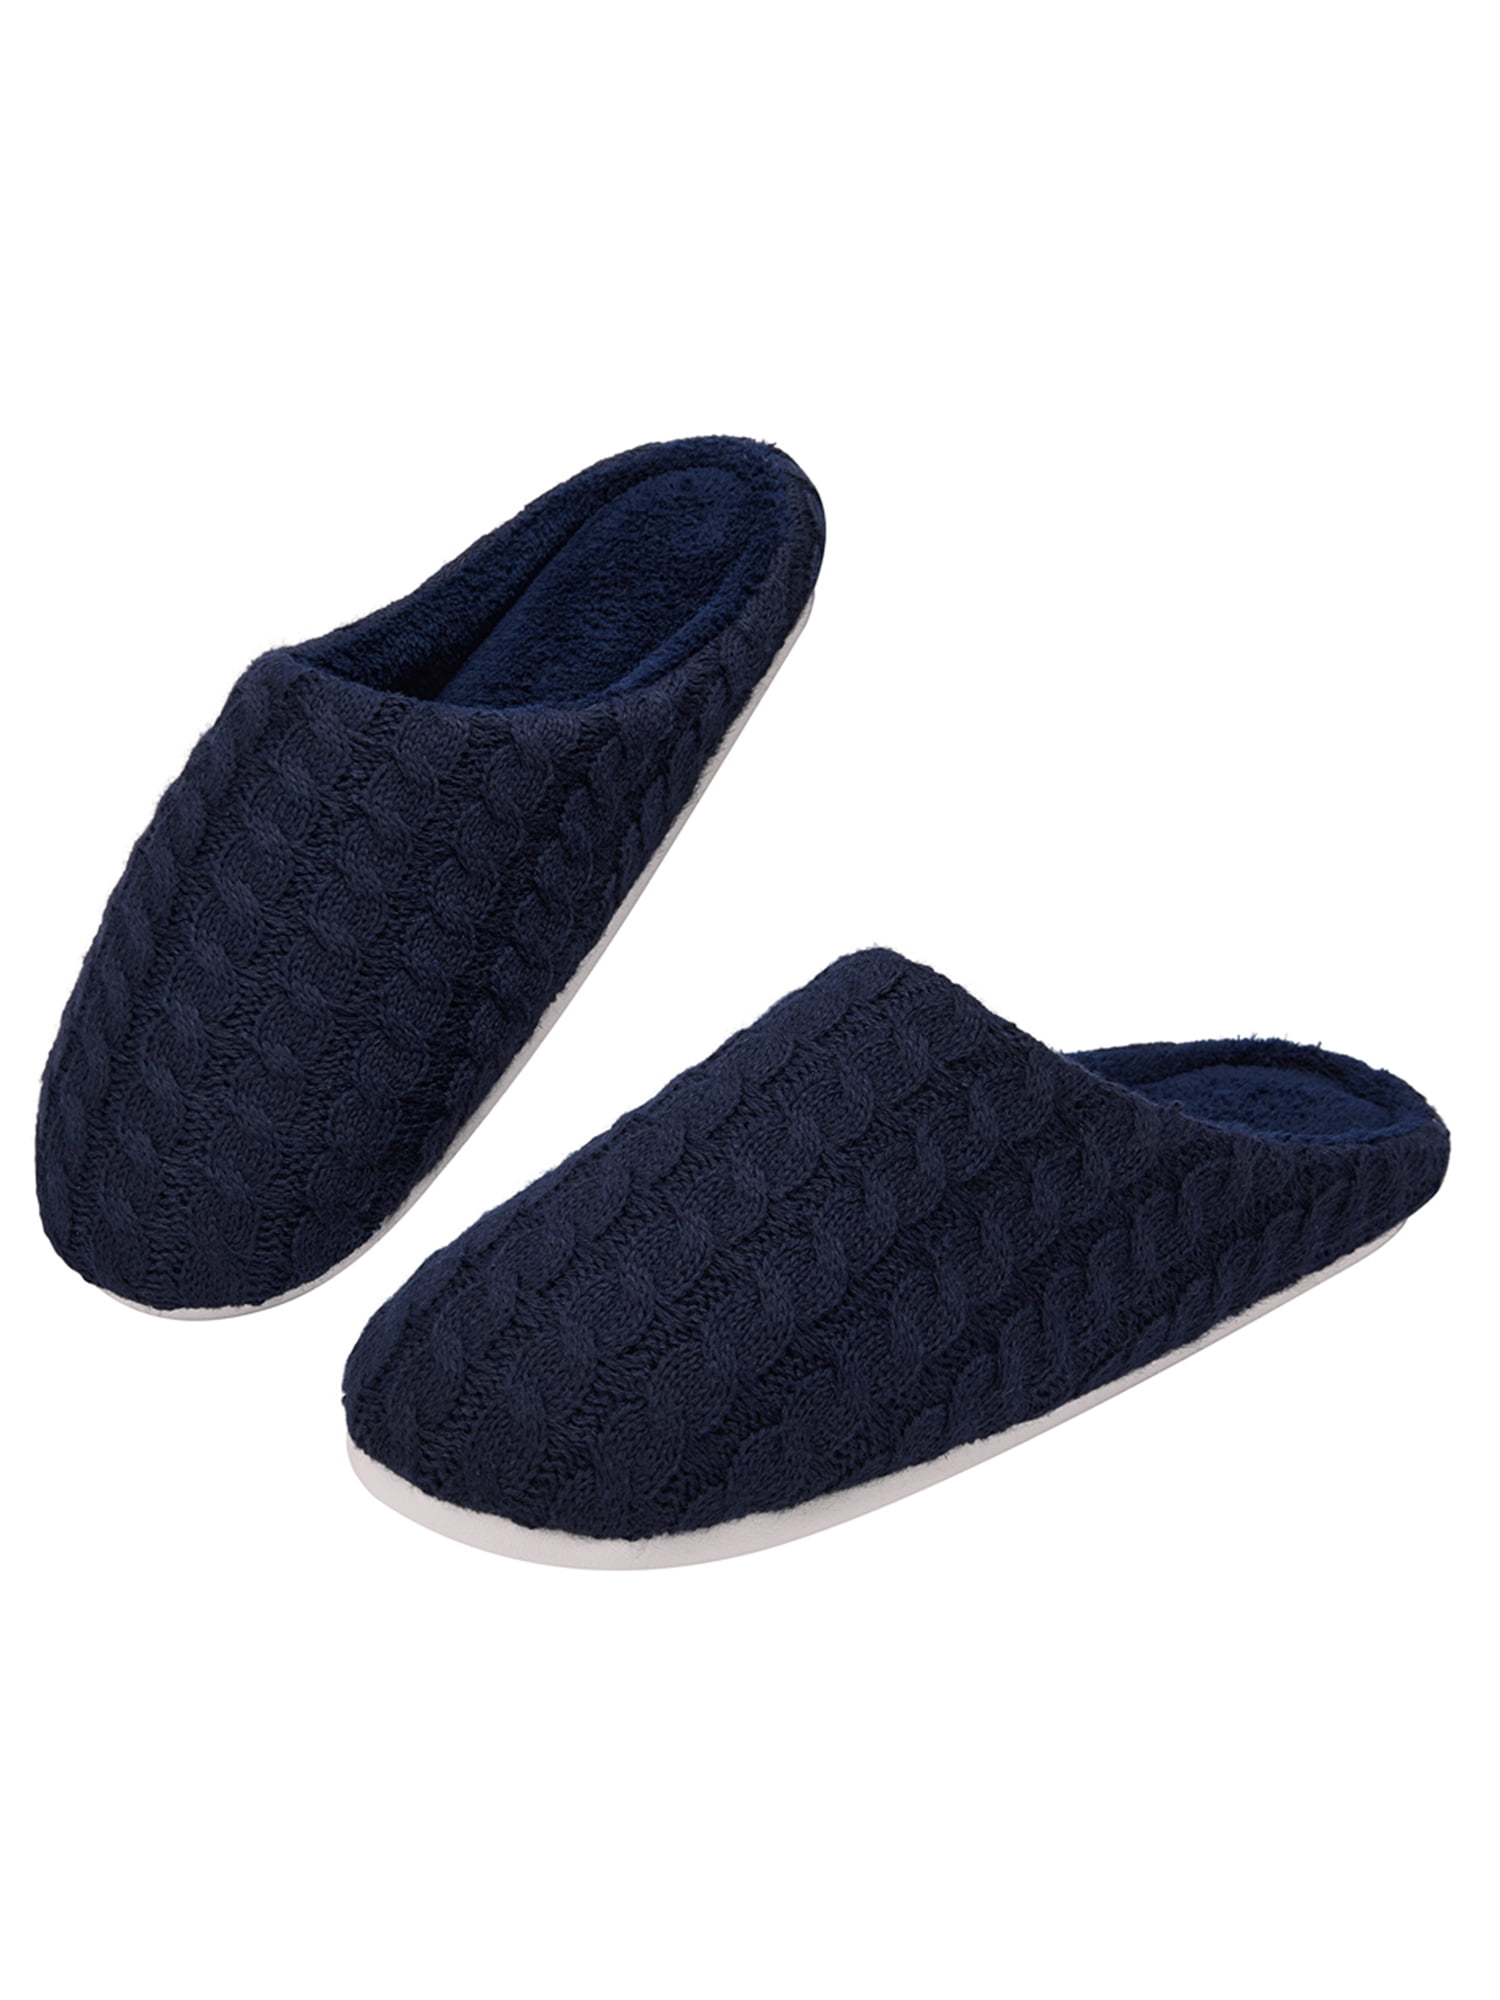 UNISEX YELETE MEN'S AND WOMEN'S LOAFER STYLE INDOOR SLIPPERS 